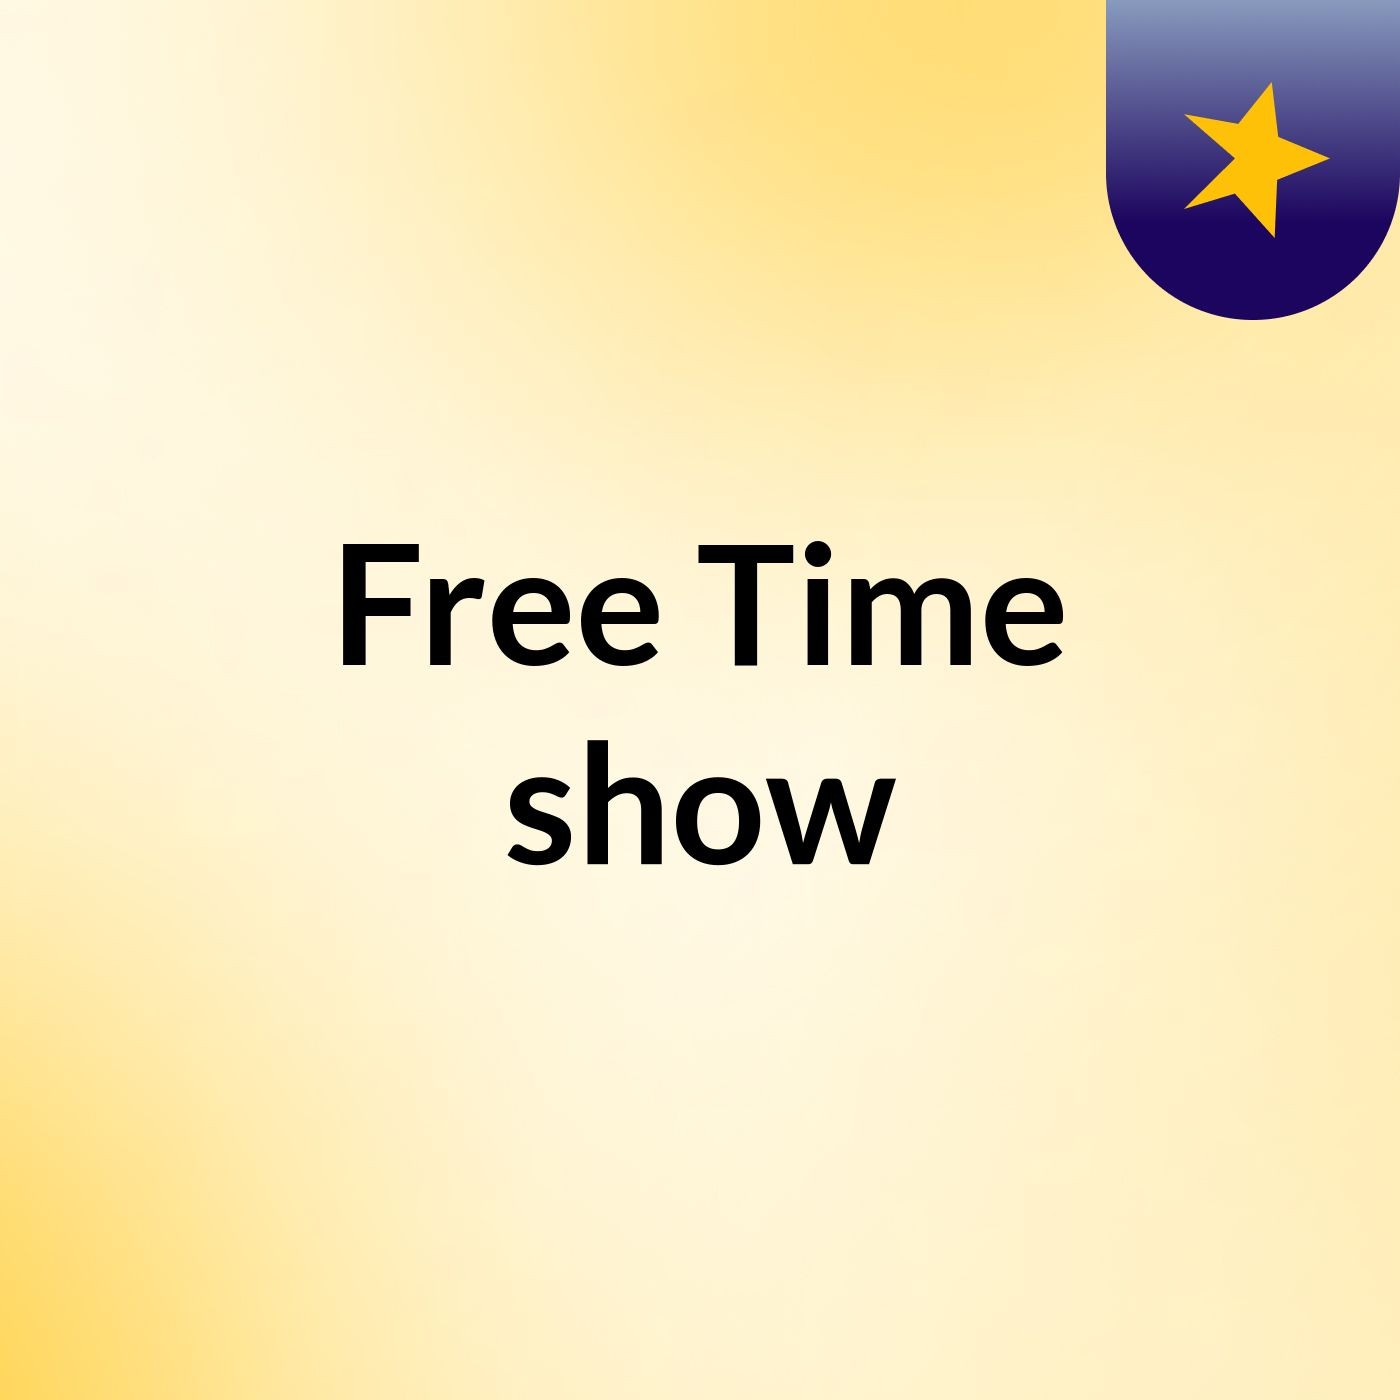 Free Time show